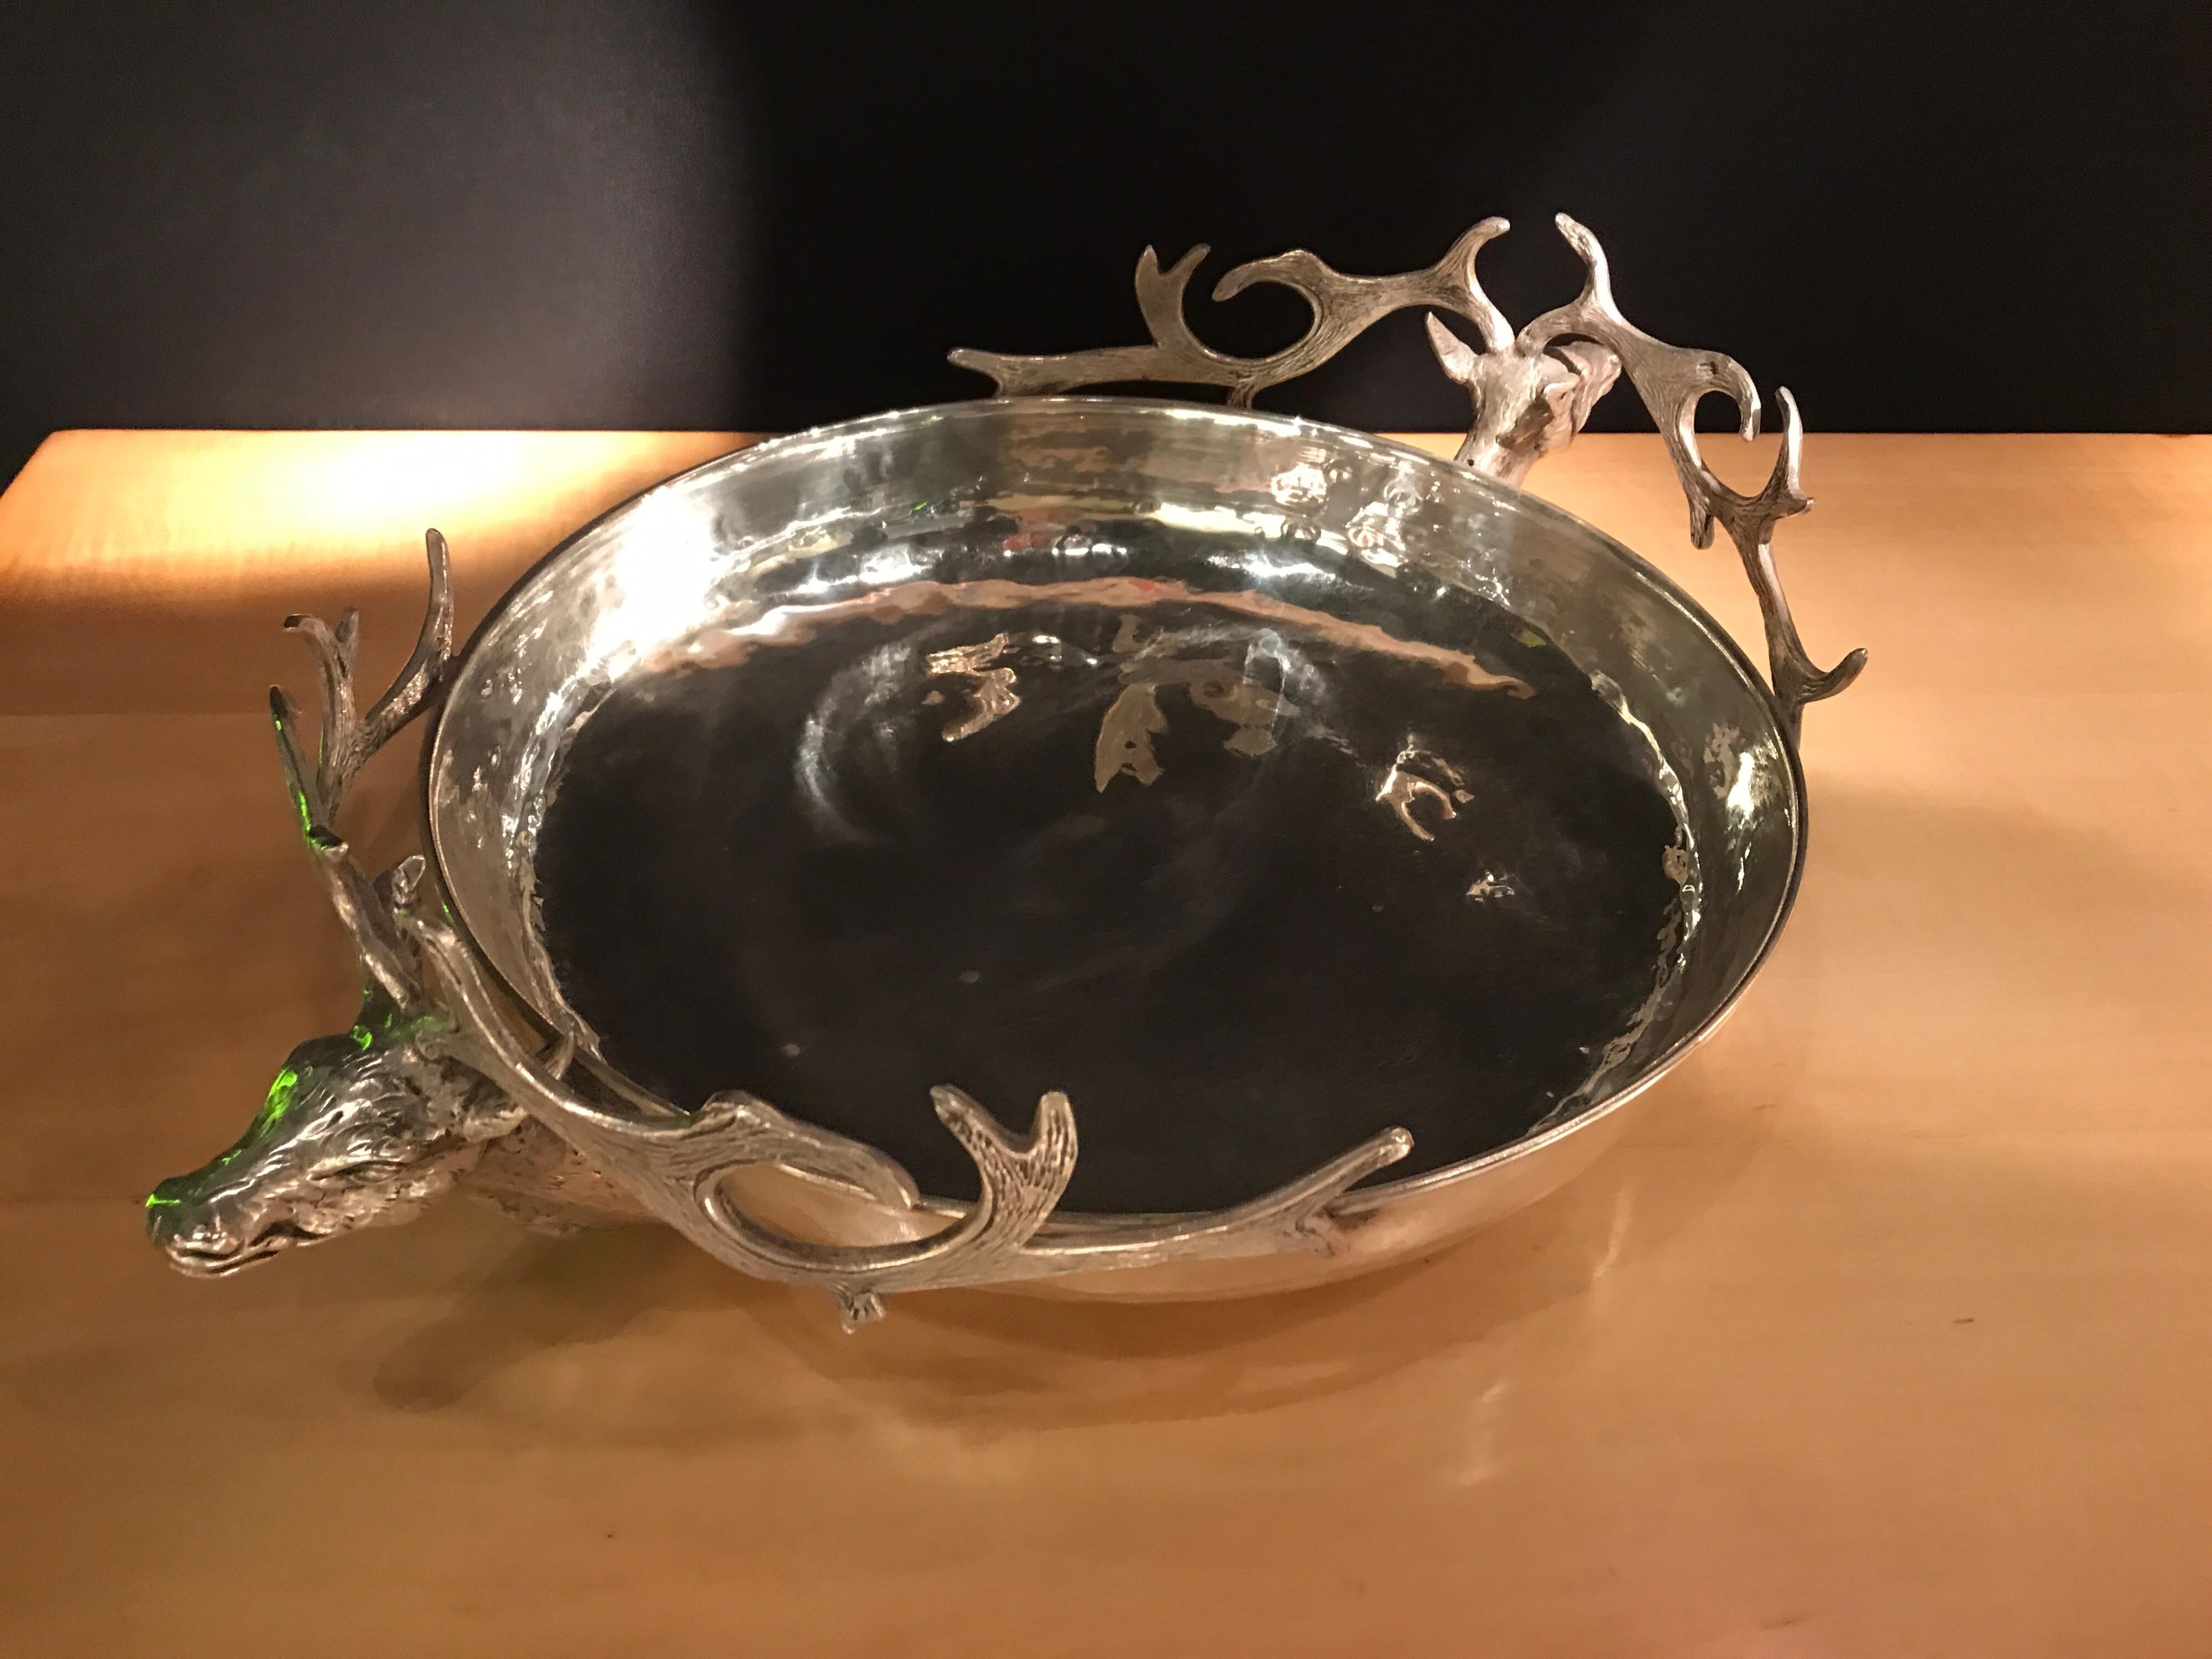 1970s Gabriela Crespi hammered metal with deer heads tray or bowl. Signed on the side.